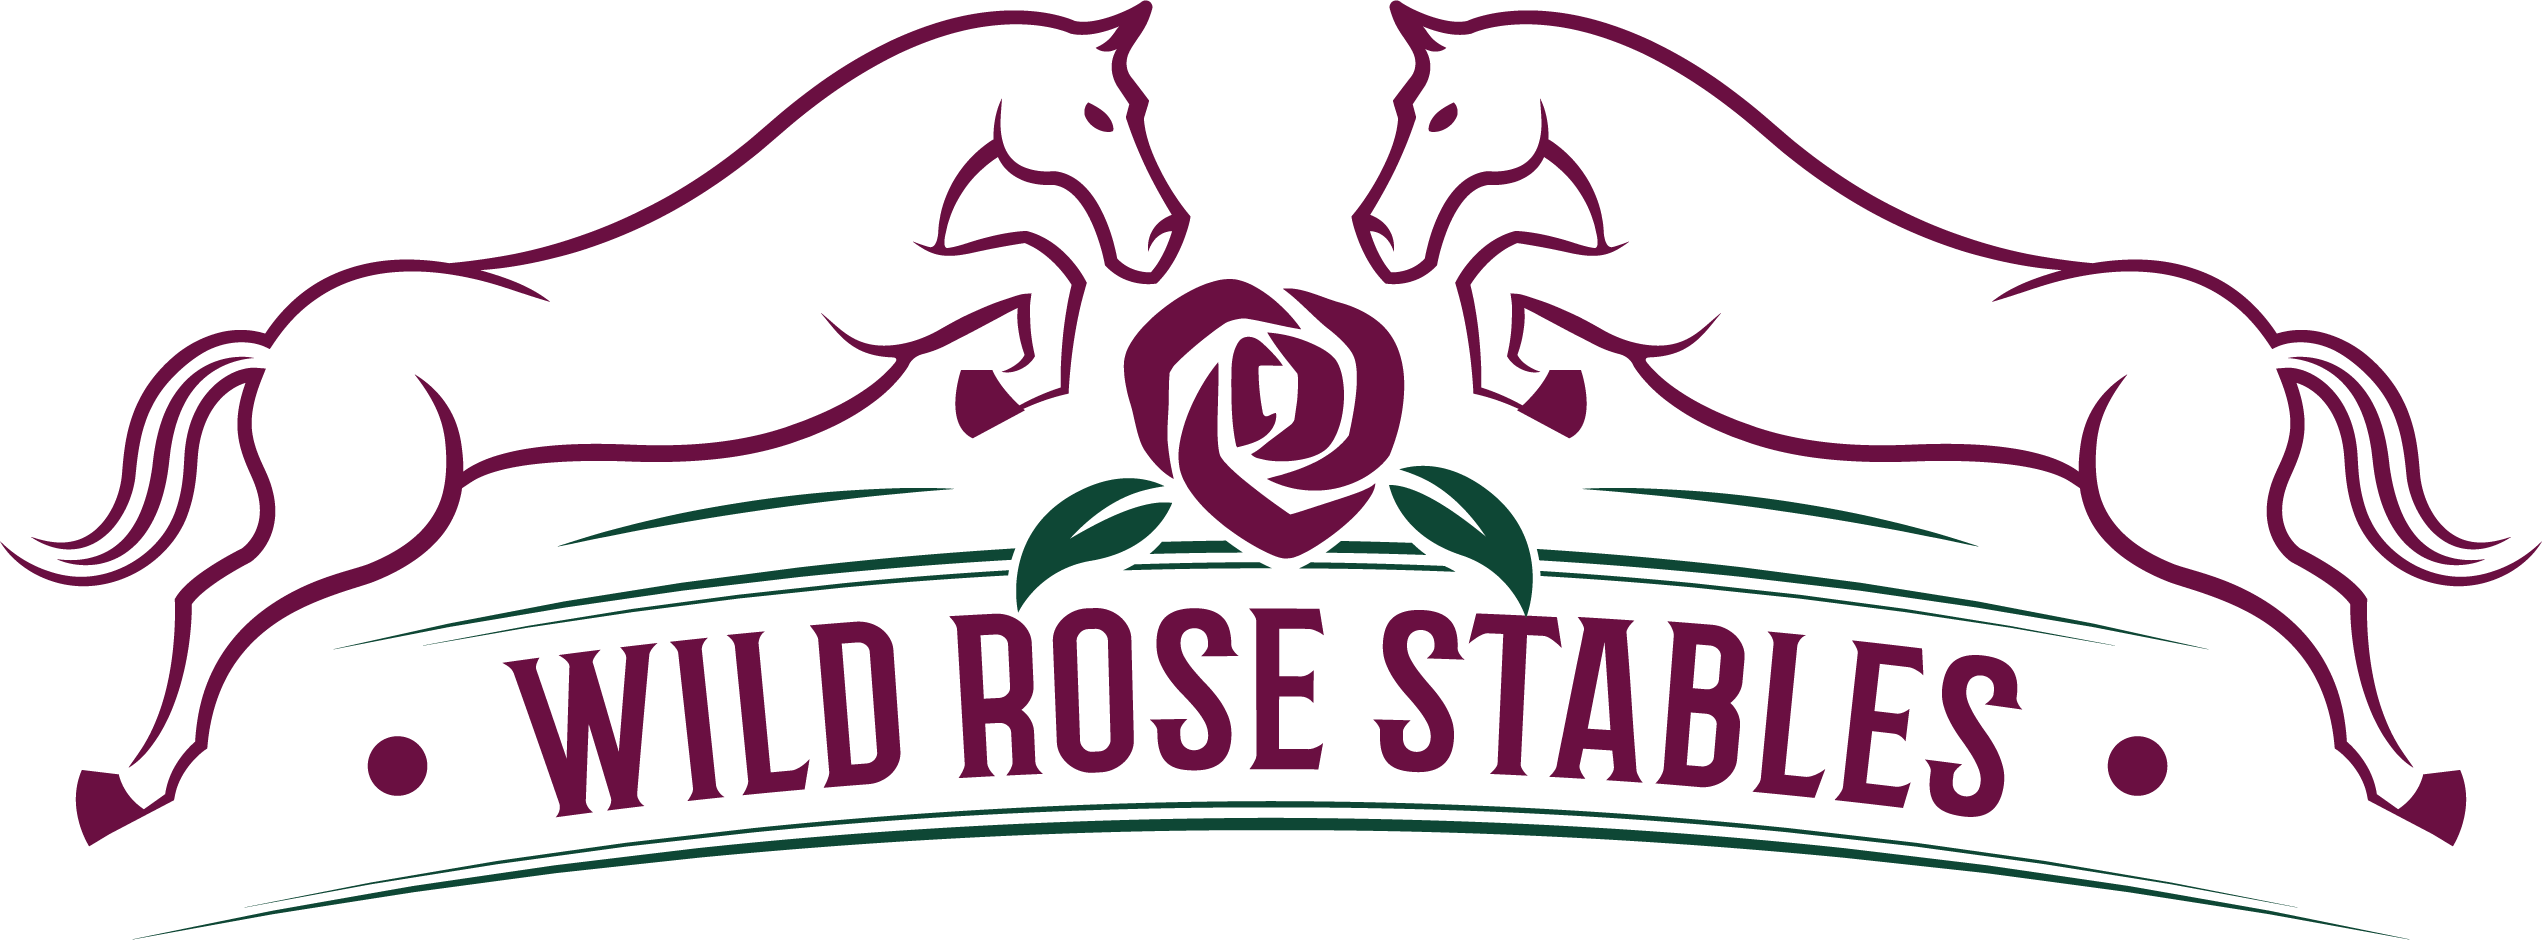 Wild Rose Stables